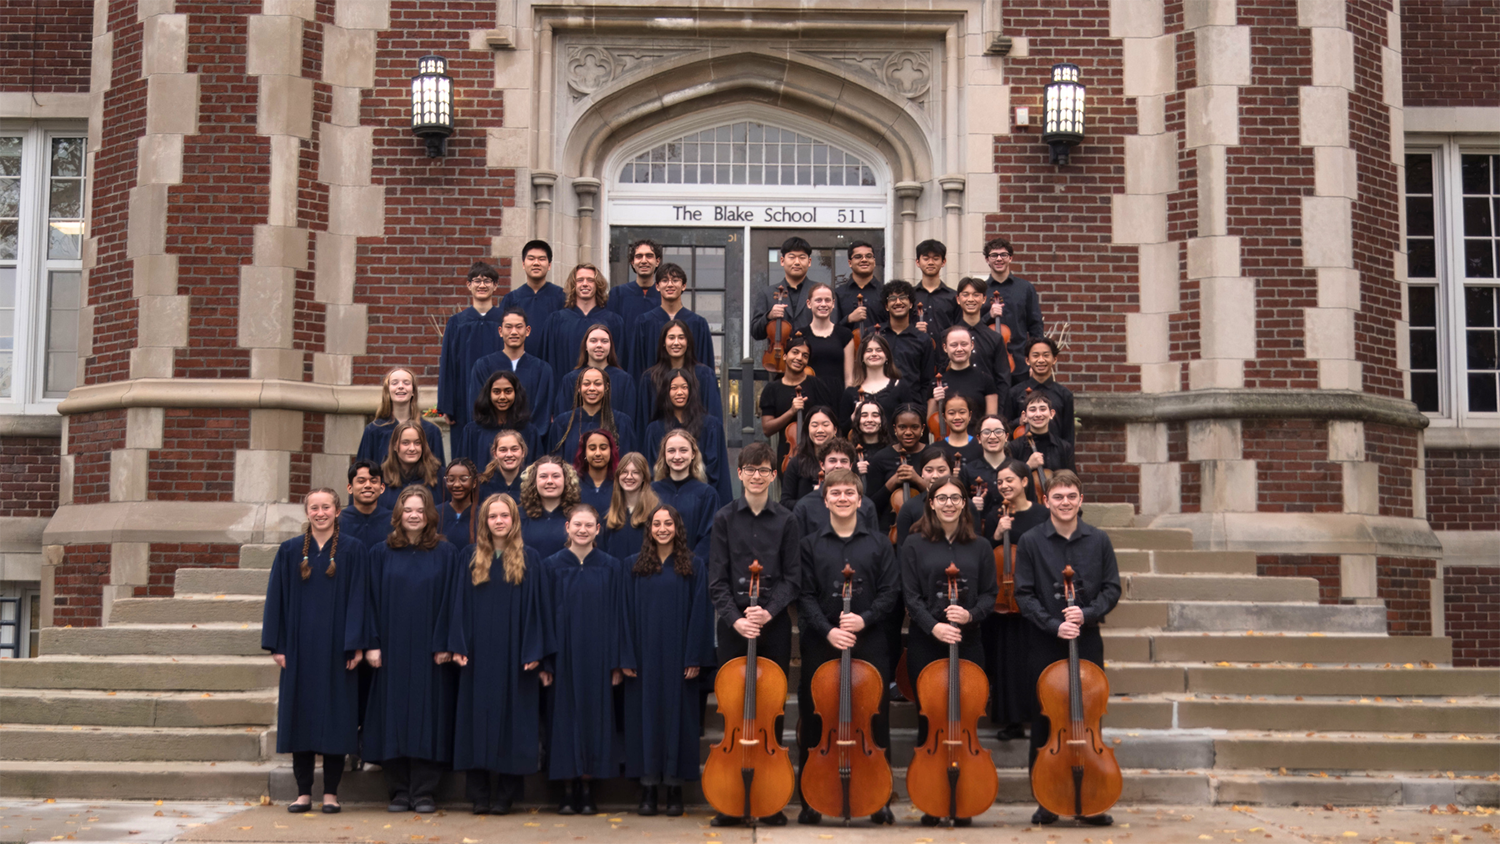 A group photo of The Blake School musical performers.